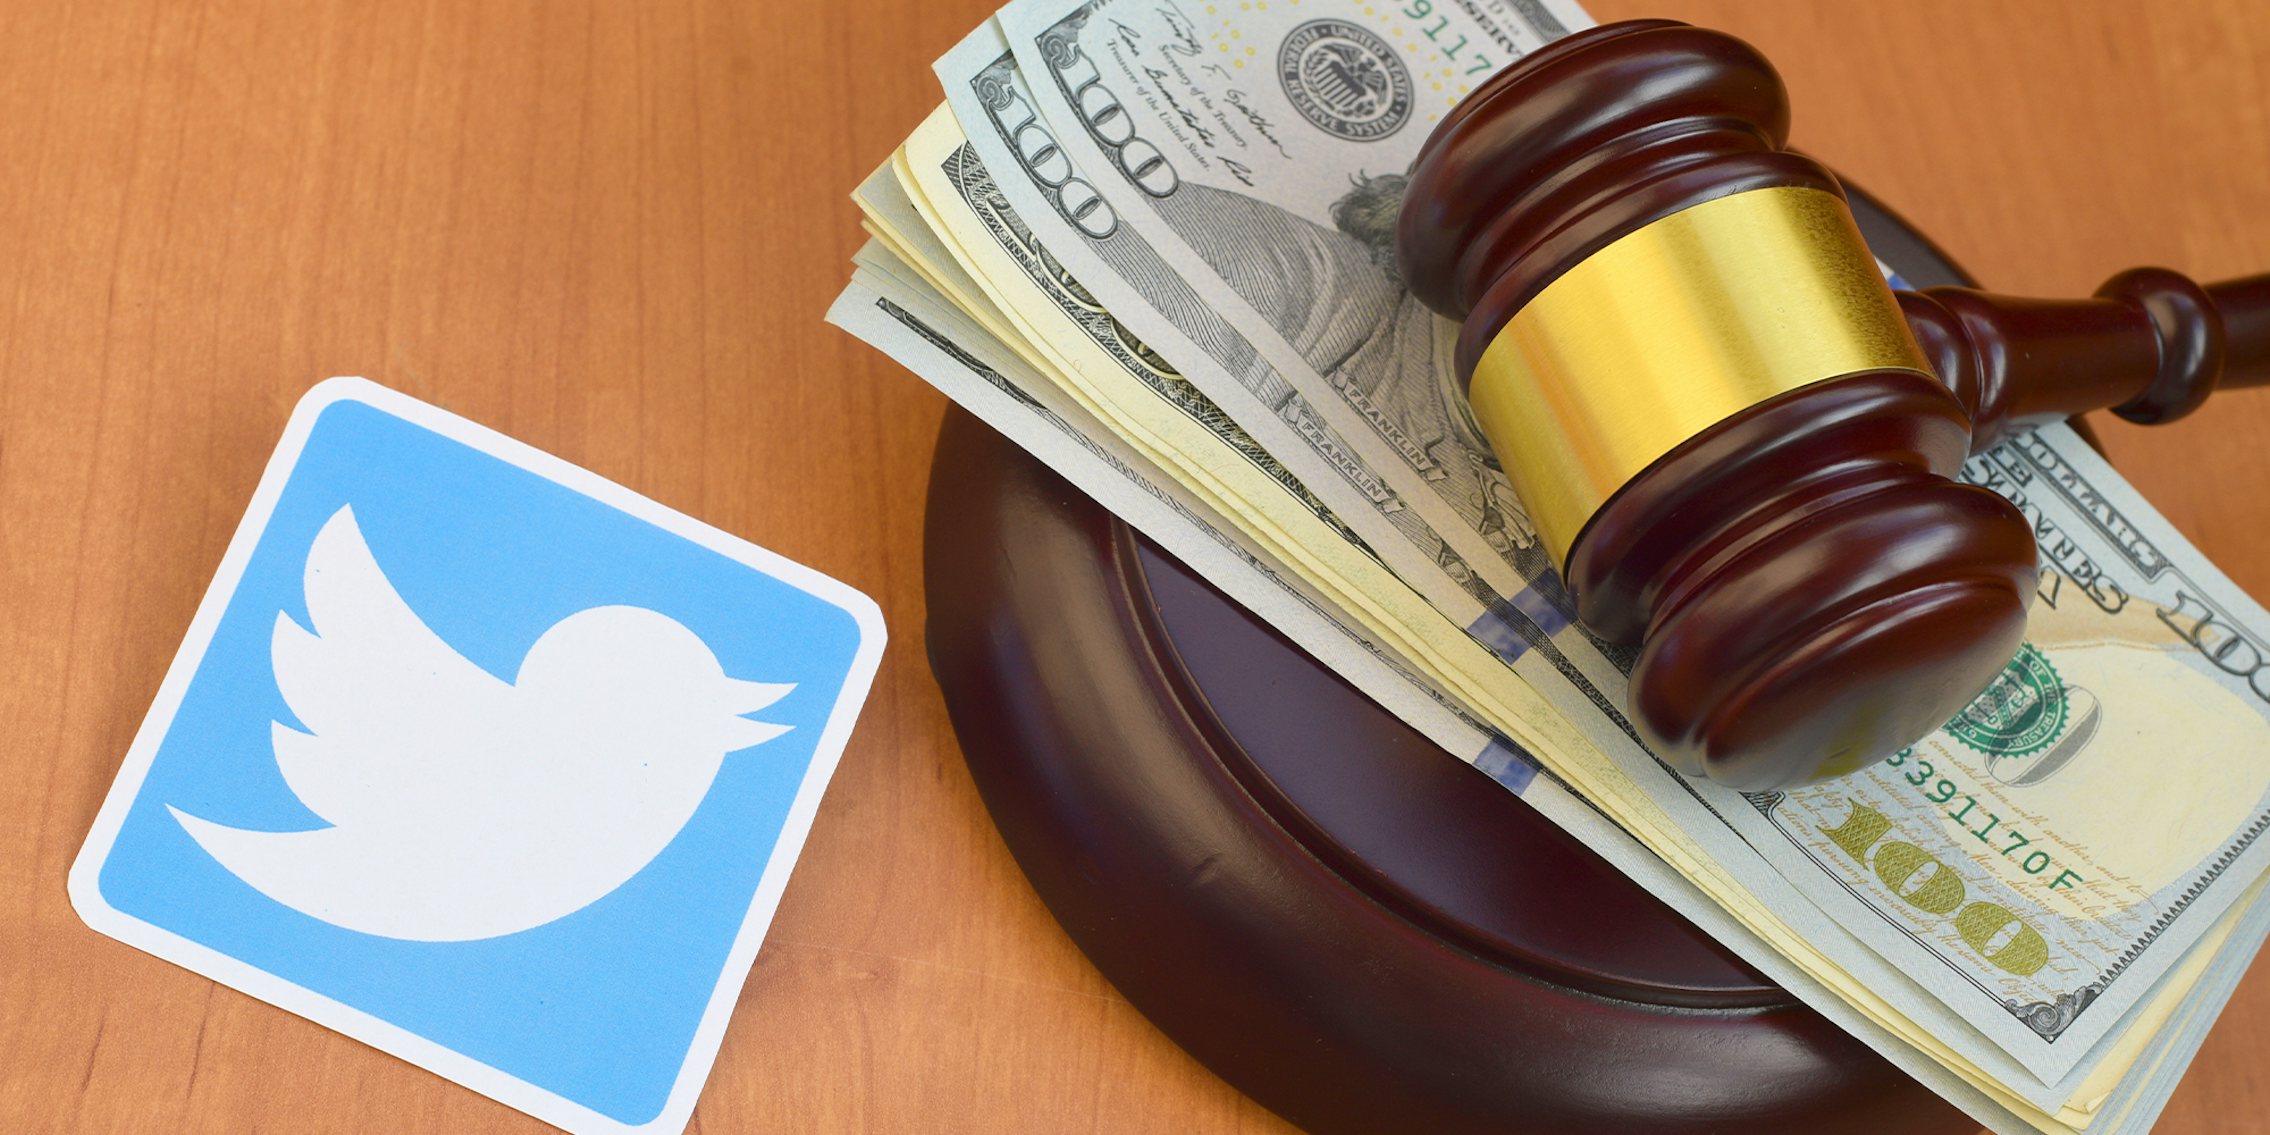 Twitter paper logo lies with judge gavel and hundred dollar bills.